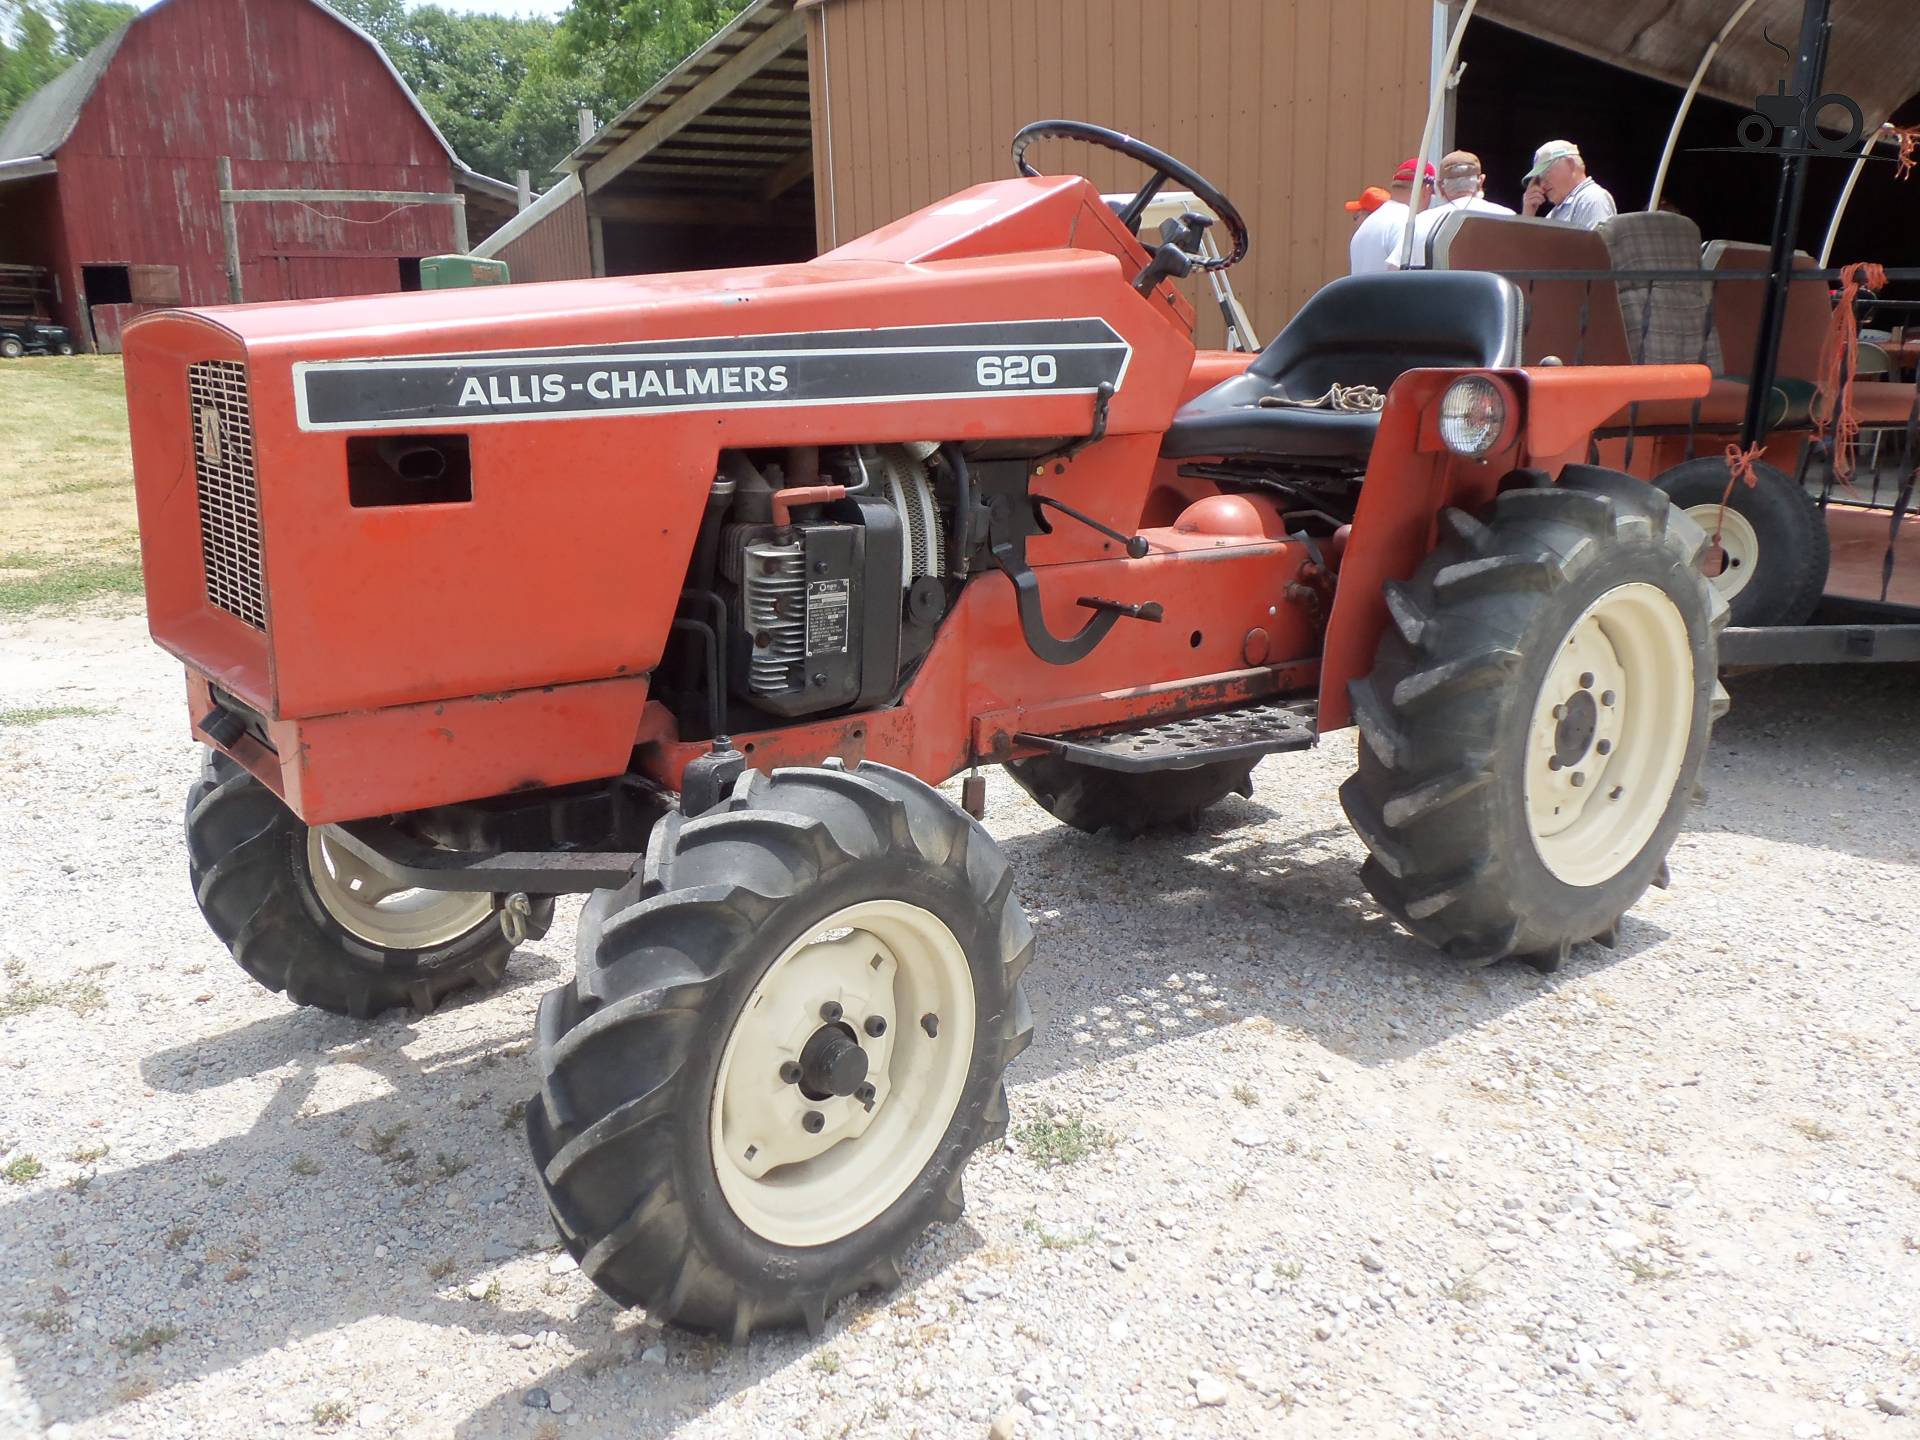 ... Chalmers 620 Specs and data - Everything about the Allis-Chalmers 620